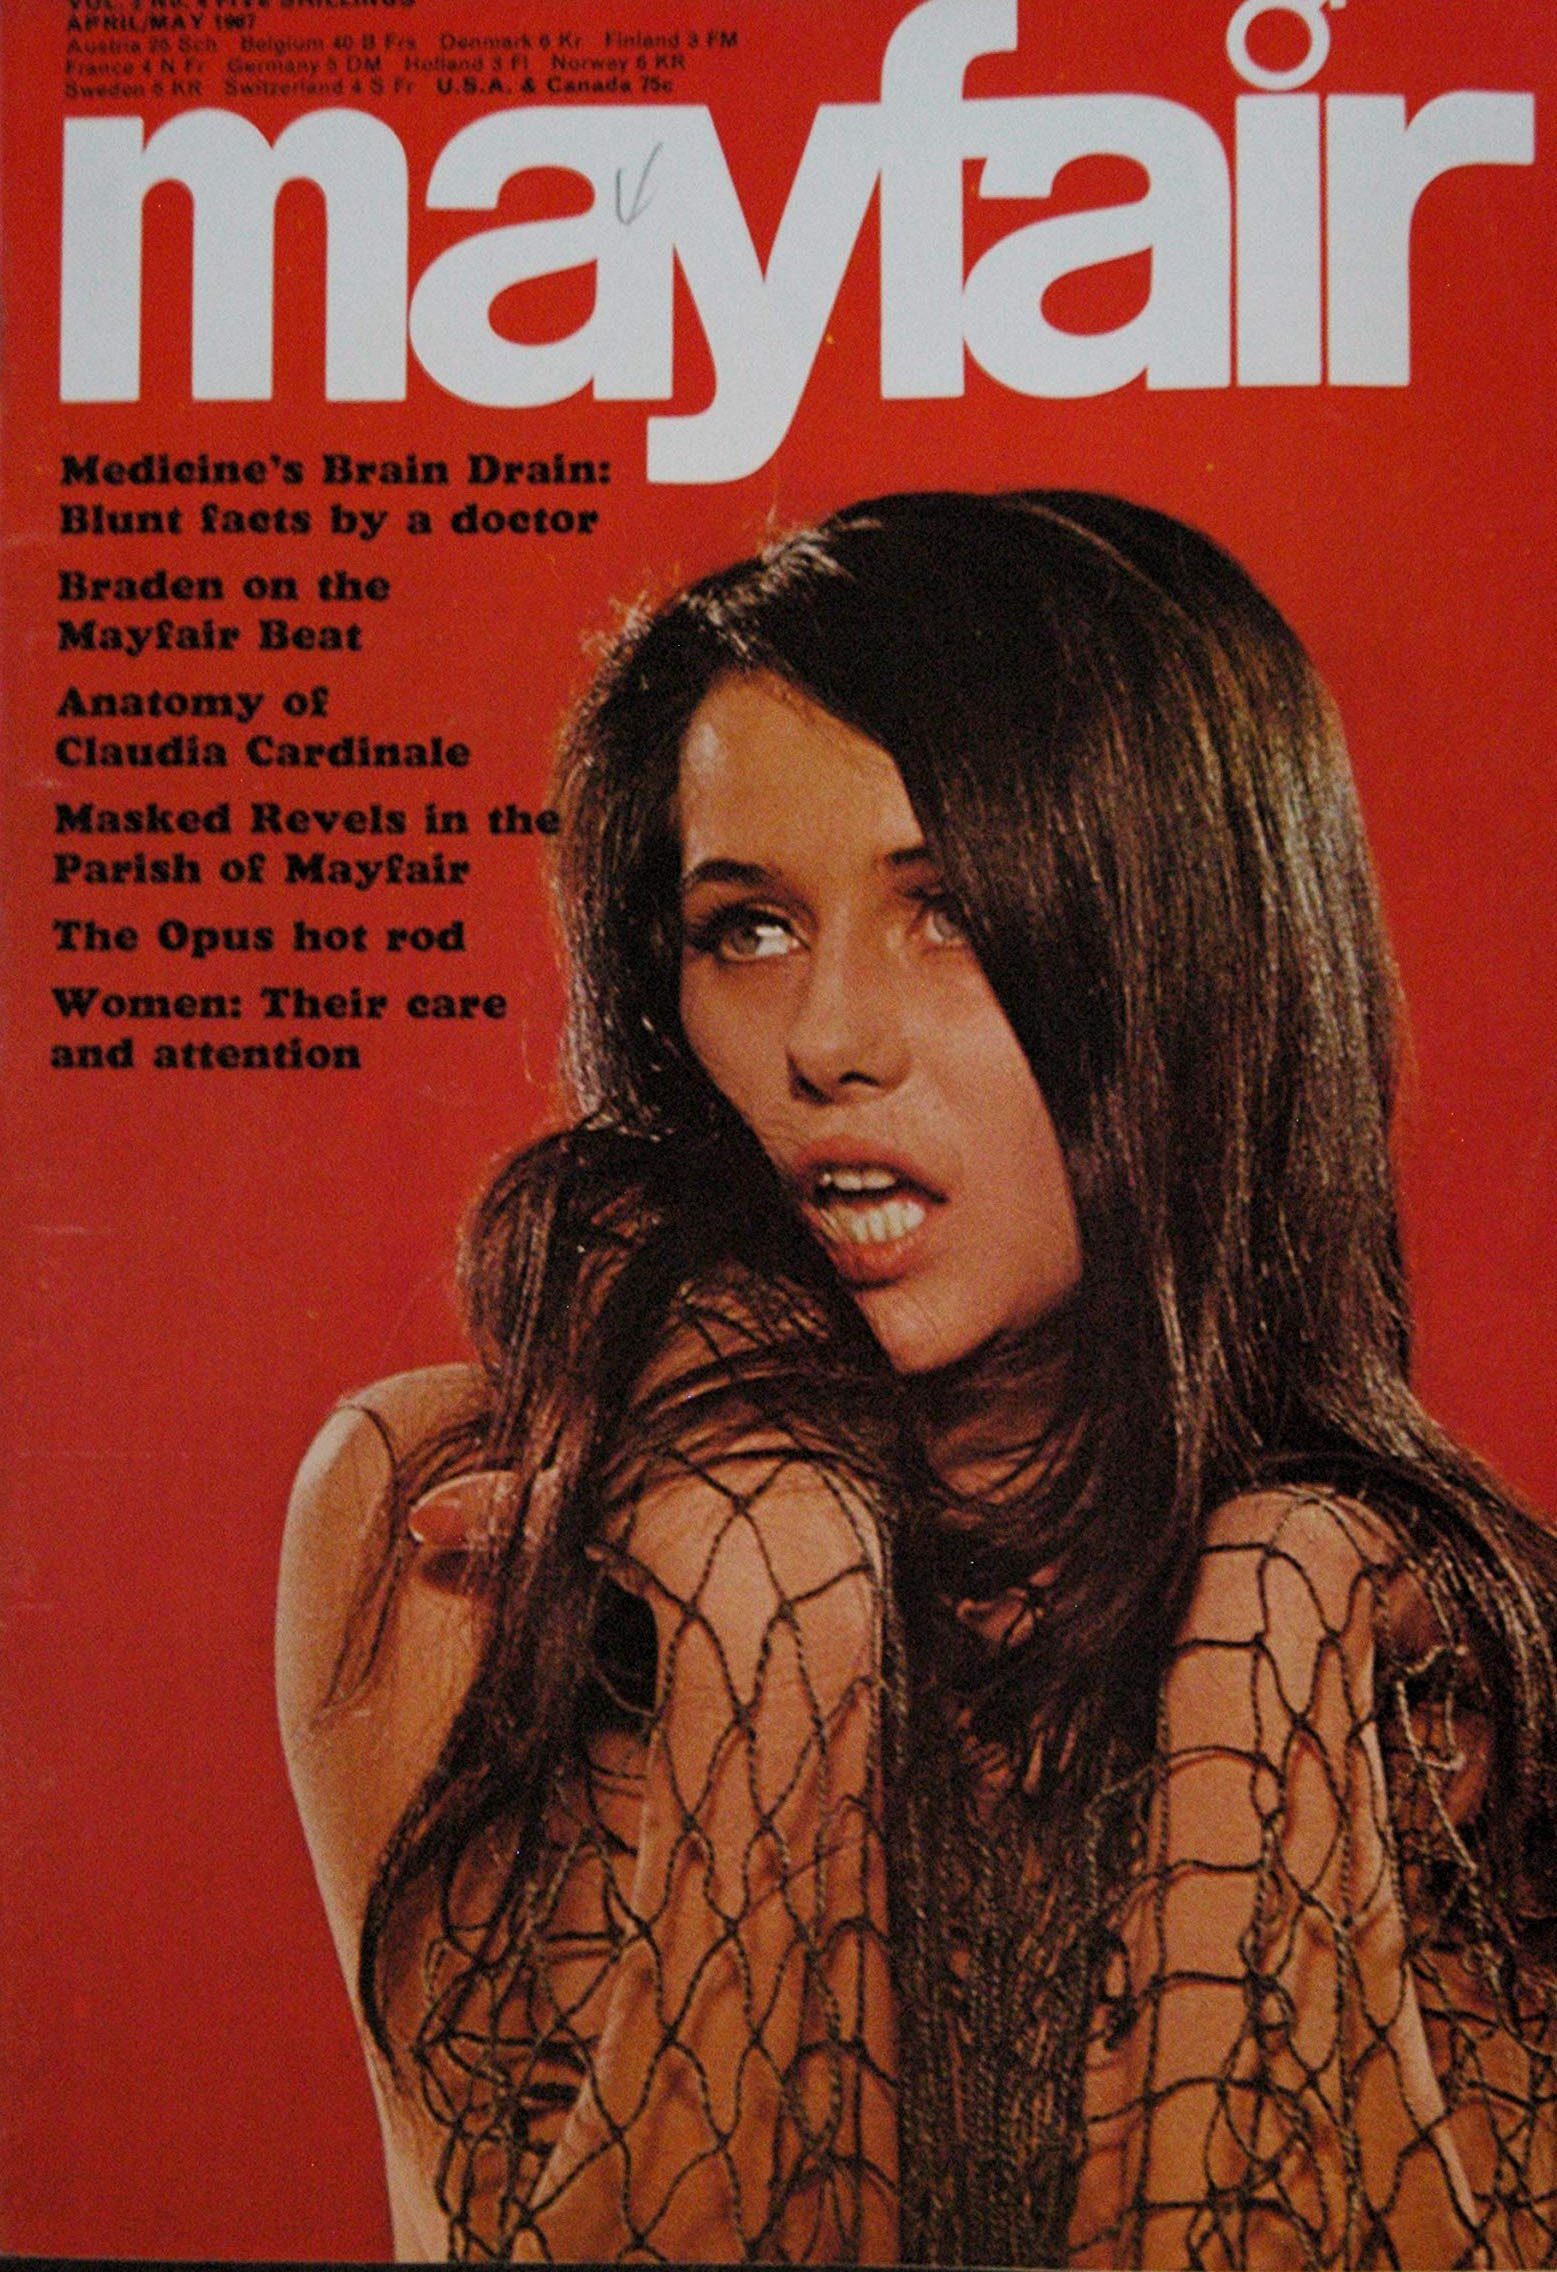 Mayfair Vol. 2 # 4 magazine back issue Mayfair magizine back copy Mayfair Vol. 2 # 4 Vintage Adult Magazine Back Issue Published by Paul Raymond Publishing Group. Medicine's Brain Drain: Blunt Facts By A Doctor.